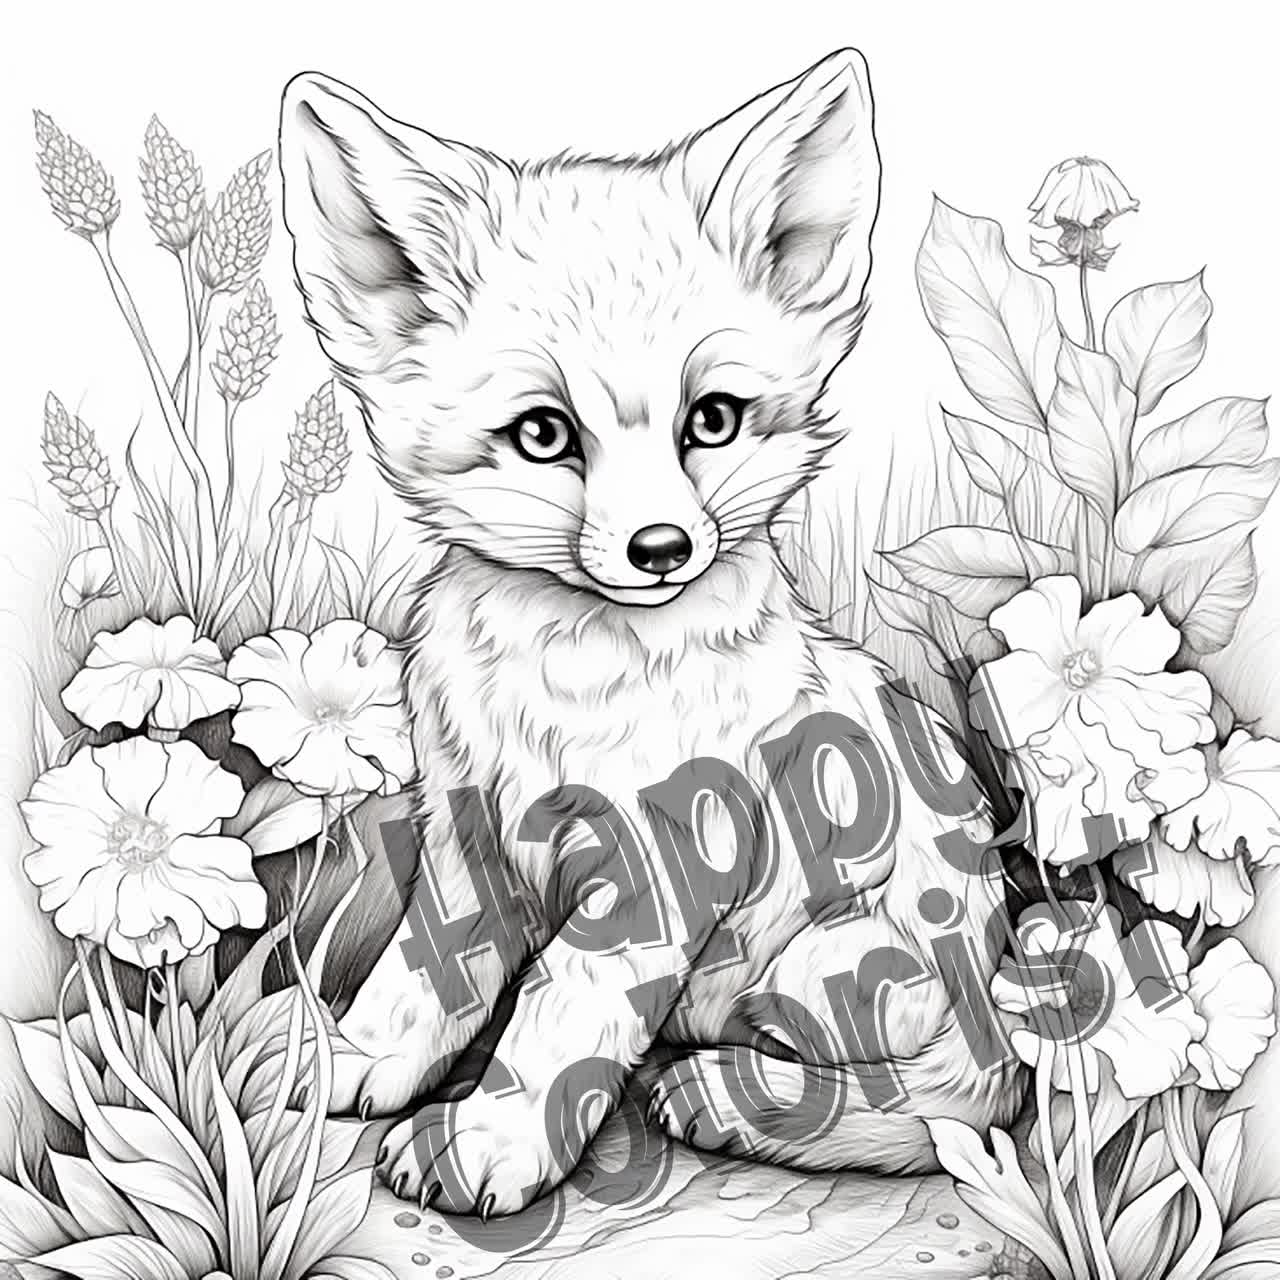 COYOTE FOX Downloadable Printable Adult Coloring Page Ruby Charm Artful  Illustrations for Coloring Enthusiasts Coloring Book Animals Nature 